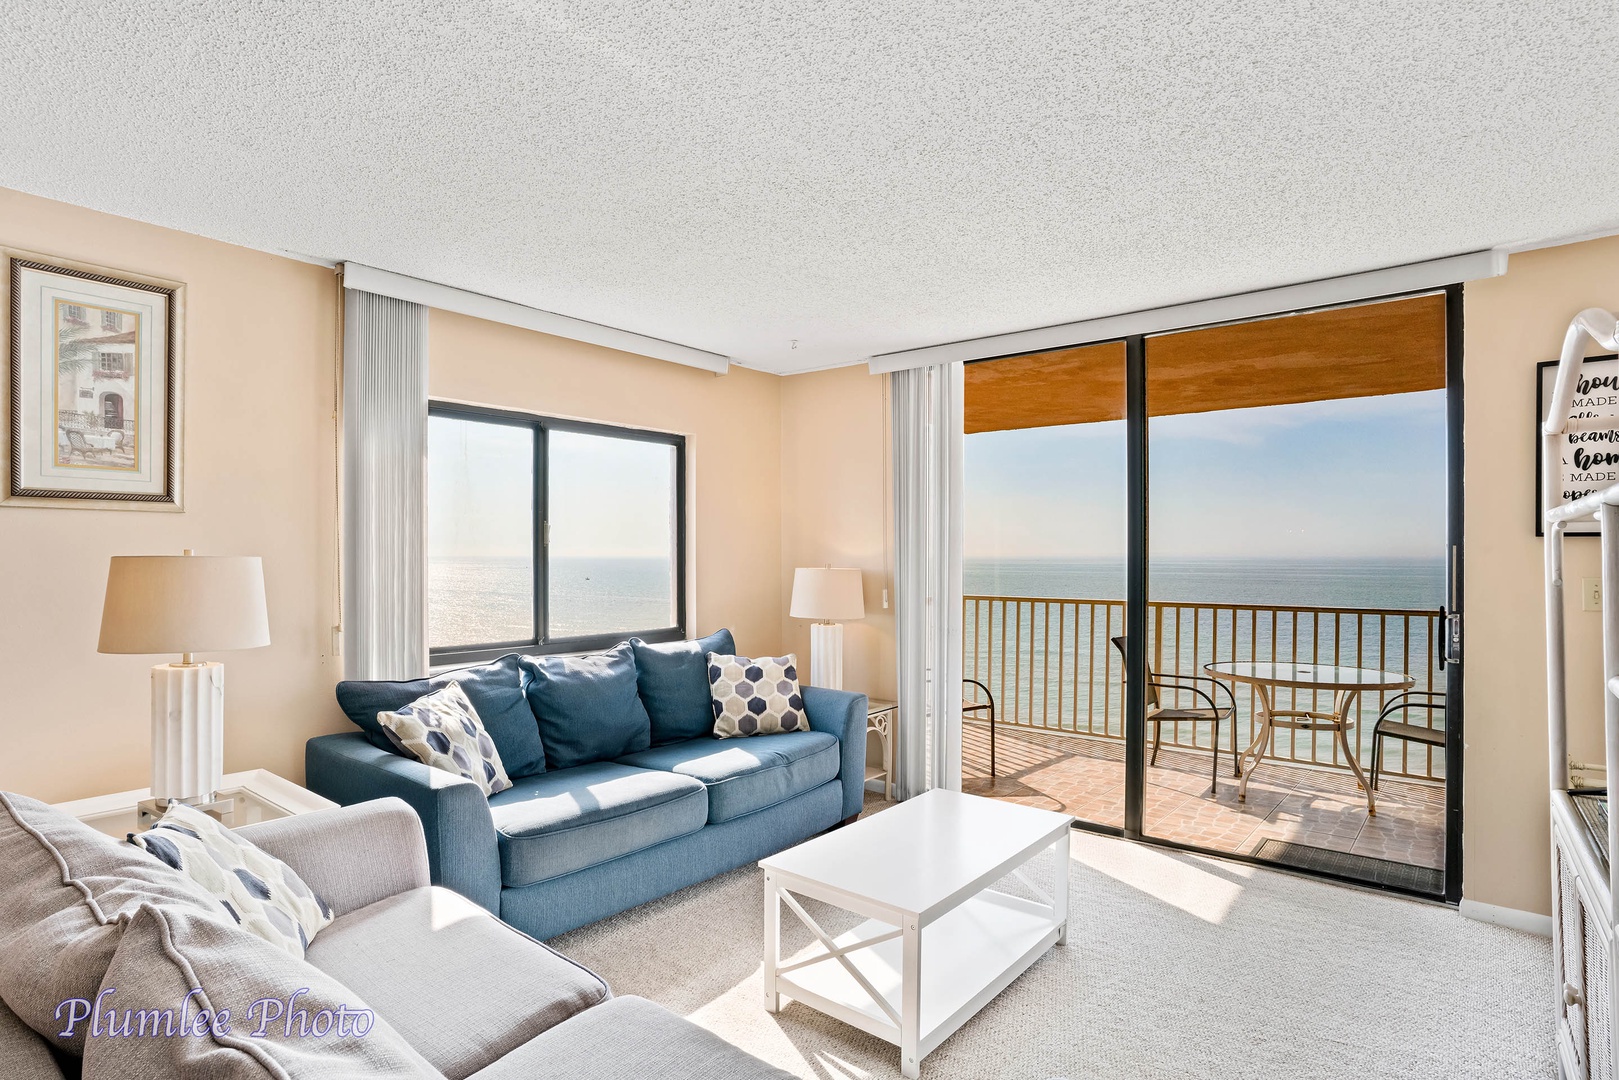 Corner unit with great views of Gulf